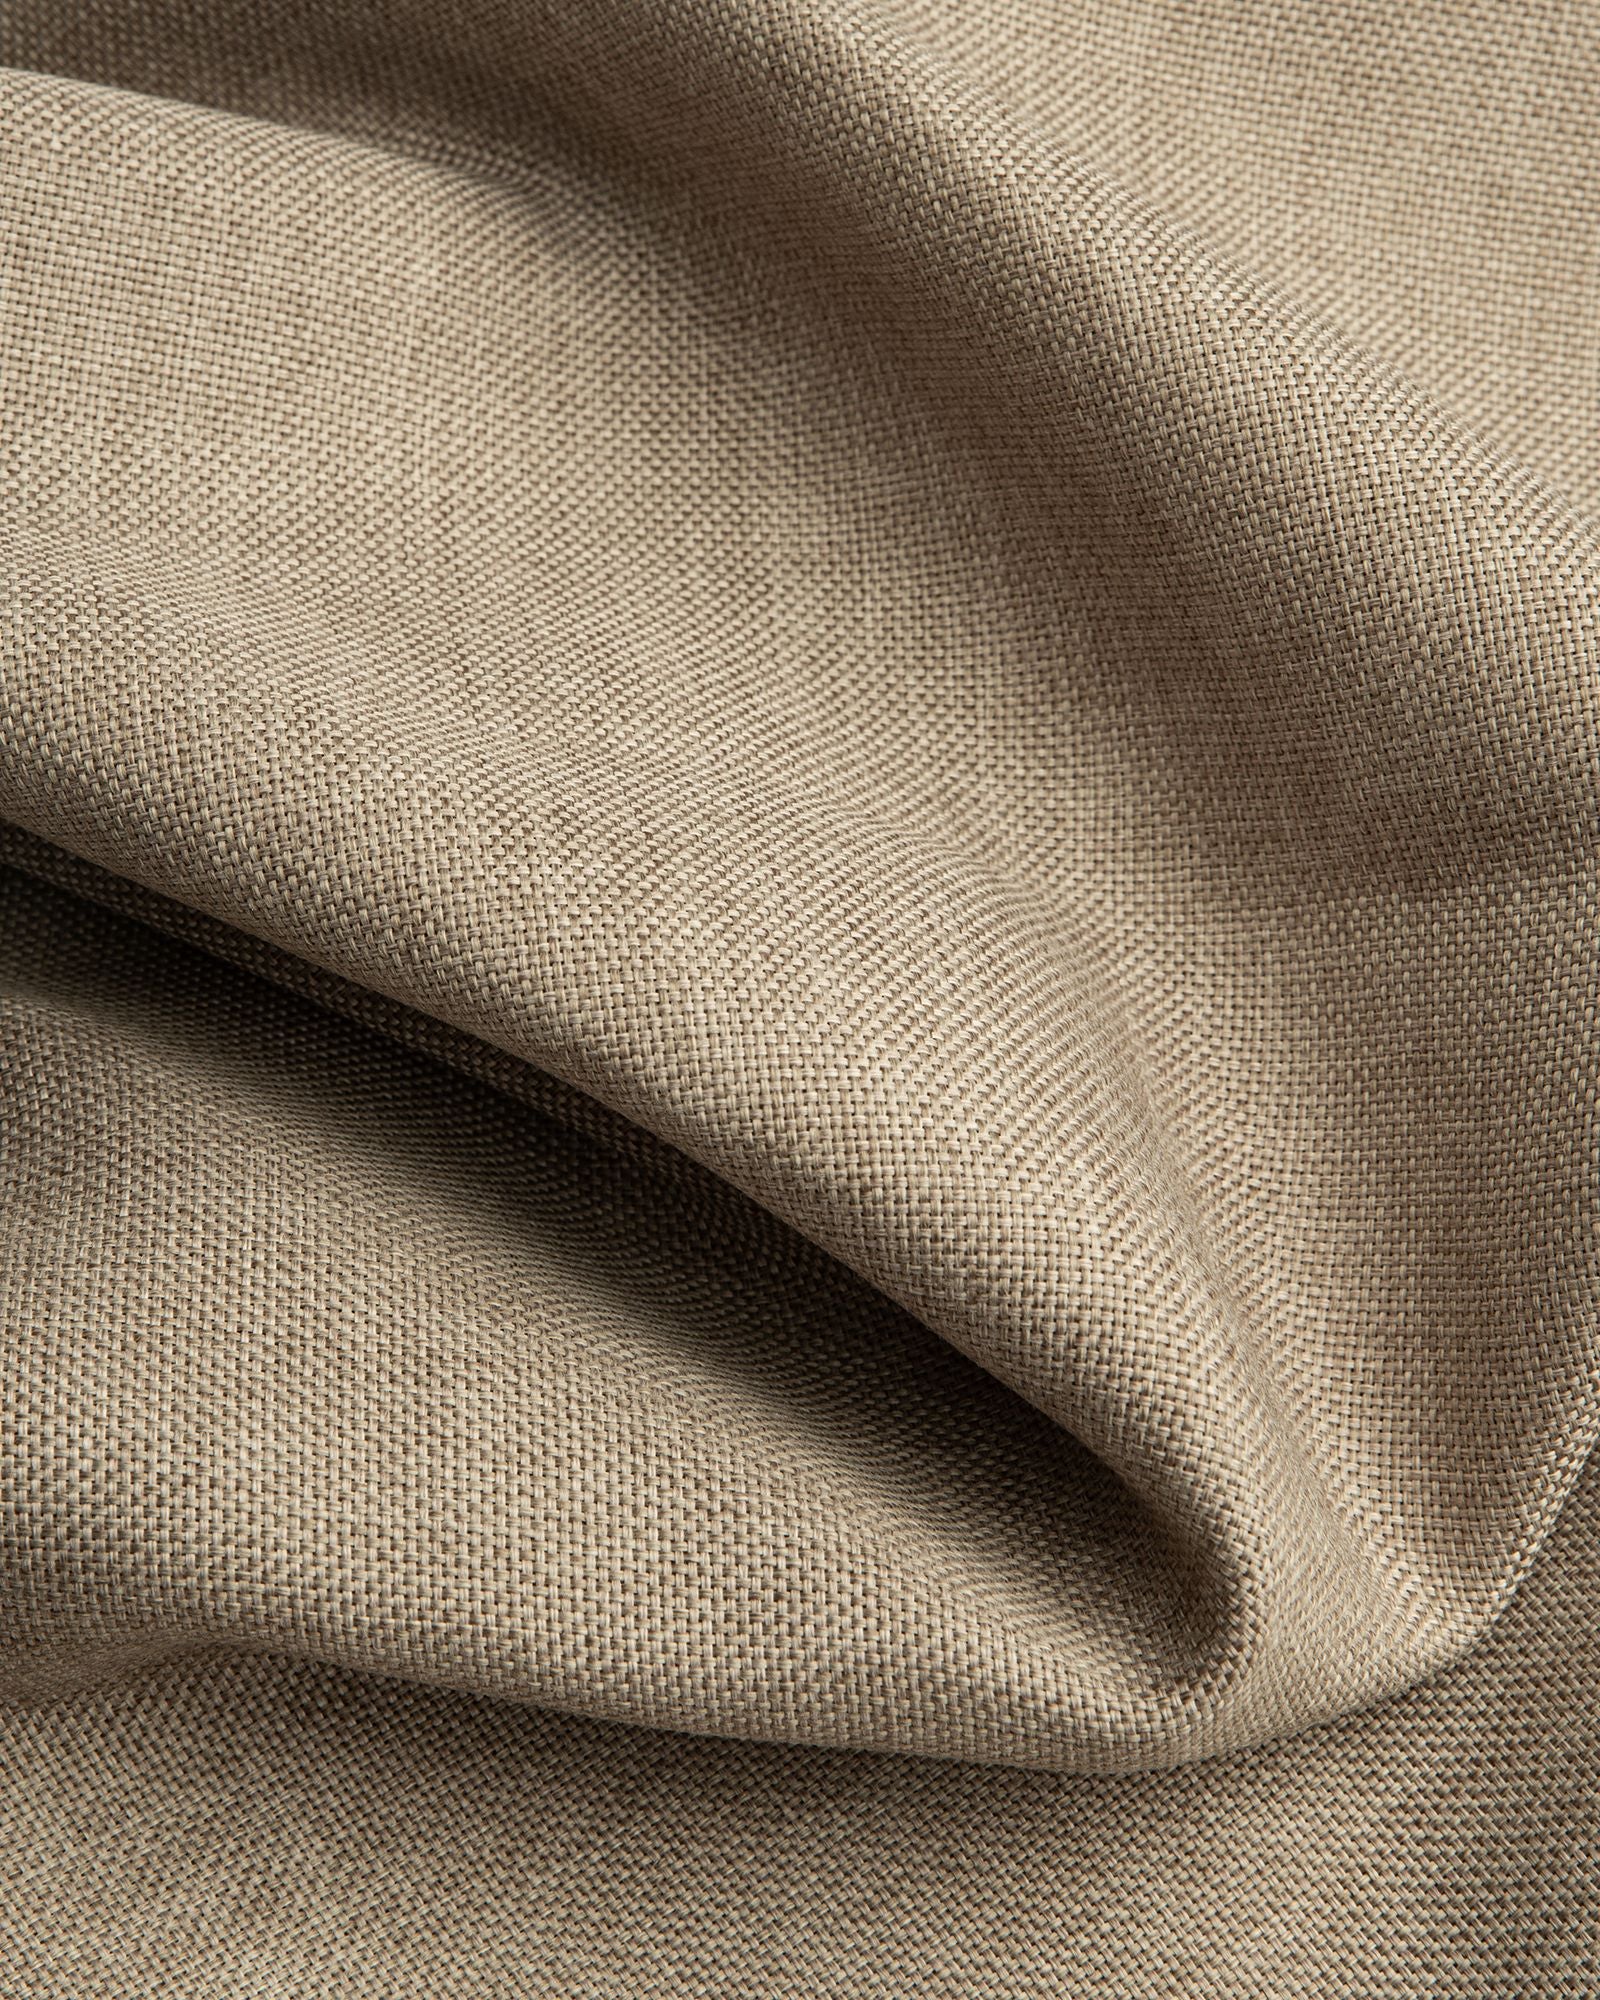 Größe: 150x 250 cm Farbe: taupe #farbe_taupe